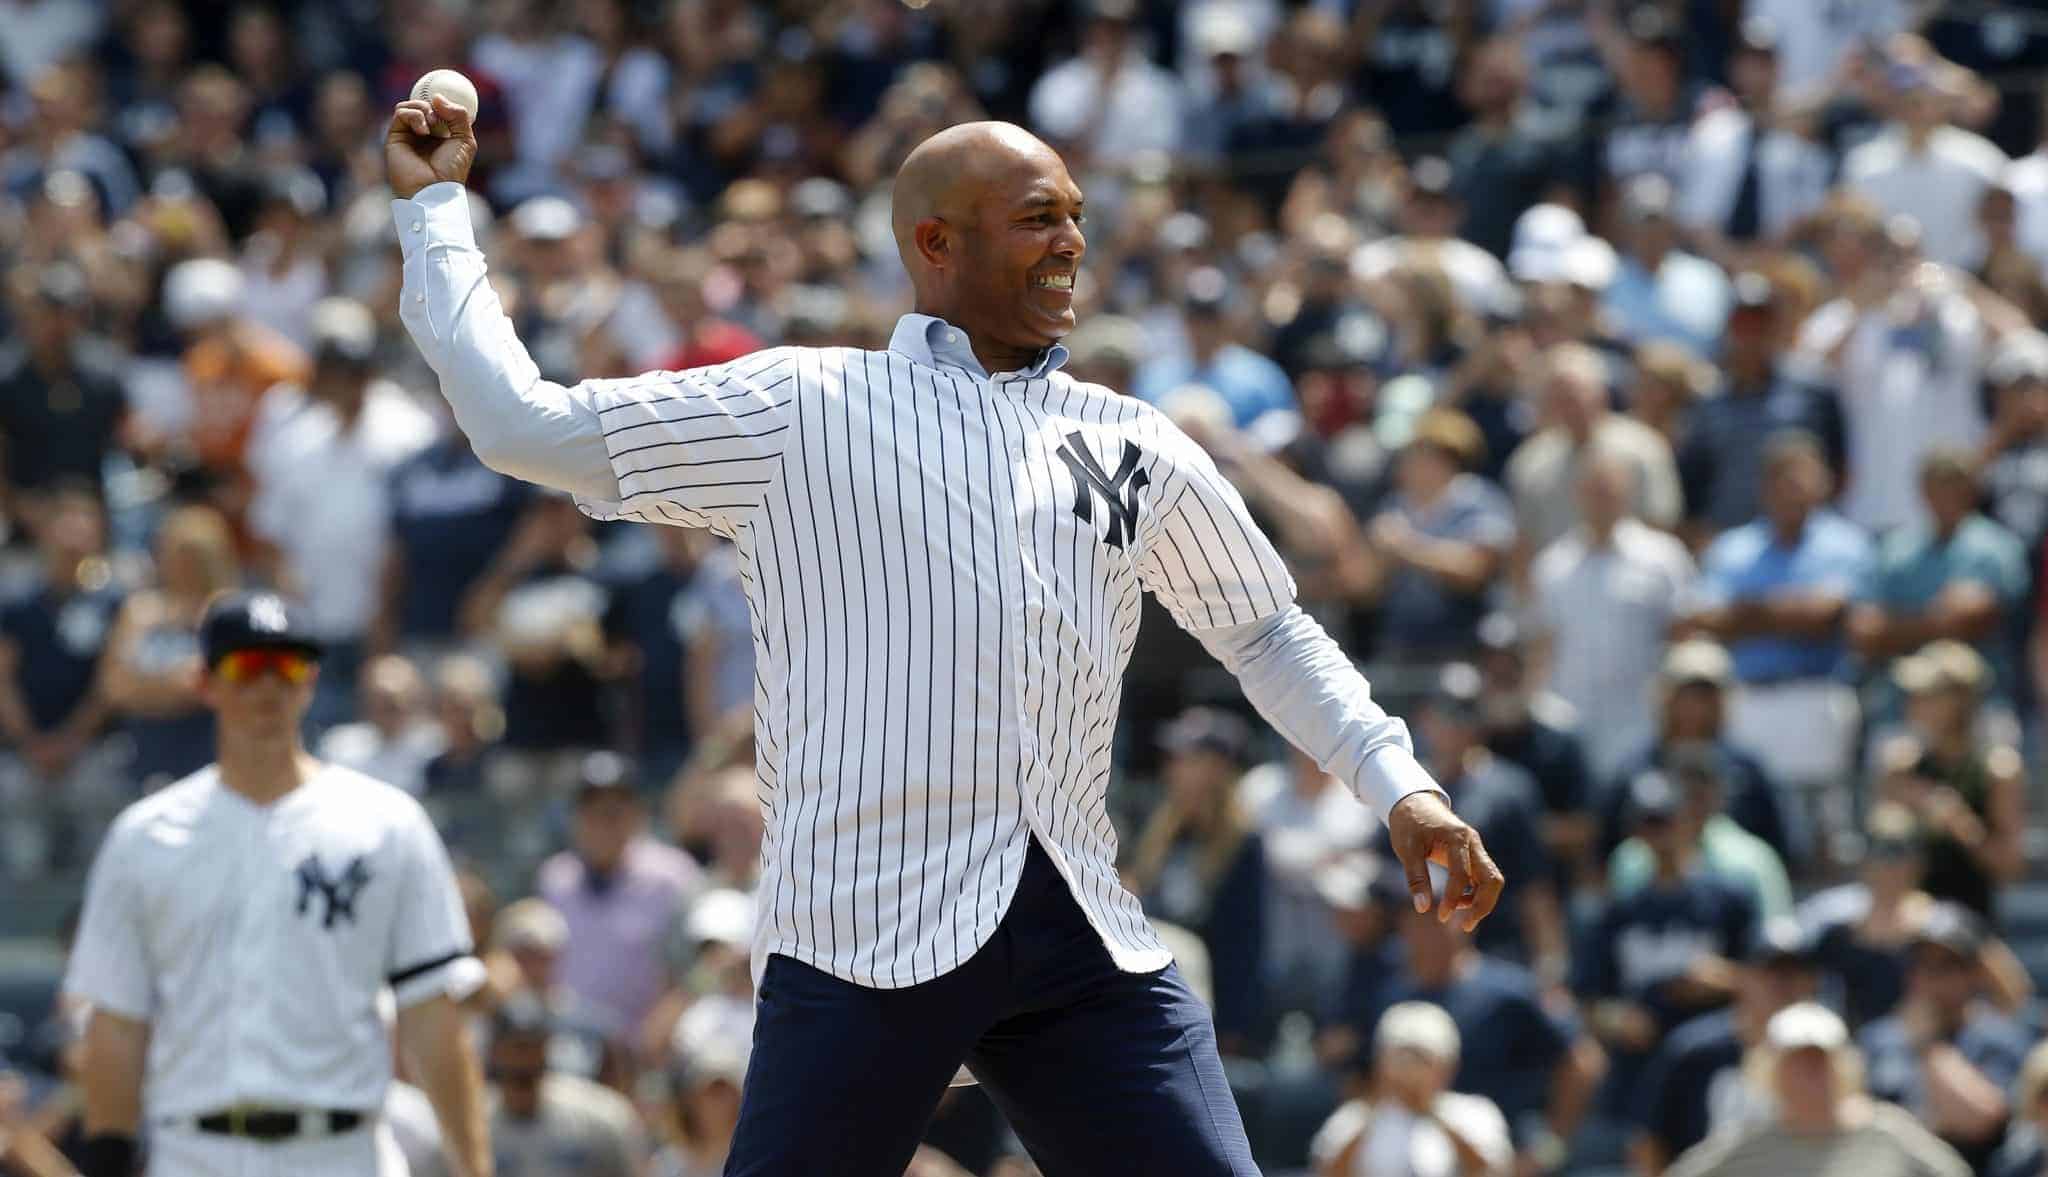 NEW YORK, NEW YORK - AUGUST 17: 2019 National Baseball Hall of Fame inductee and former New York Yankee Mariano Rivera throws the ceremonial first pitch before a game between the Yankees and the Cleveland Indians at Yankee Stadium on August 17, 2019 in New York City.